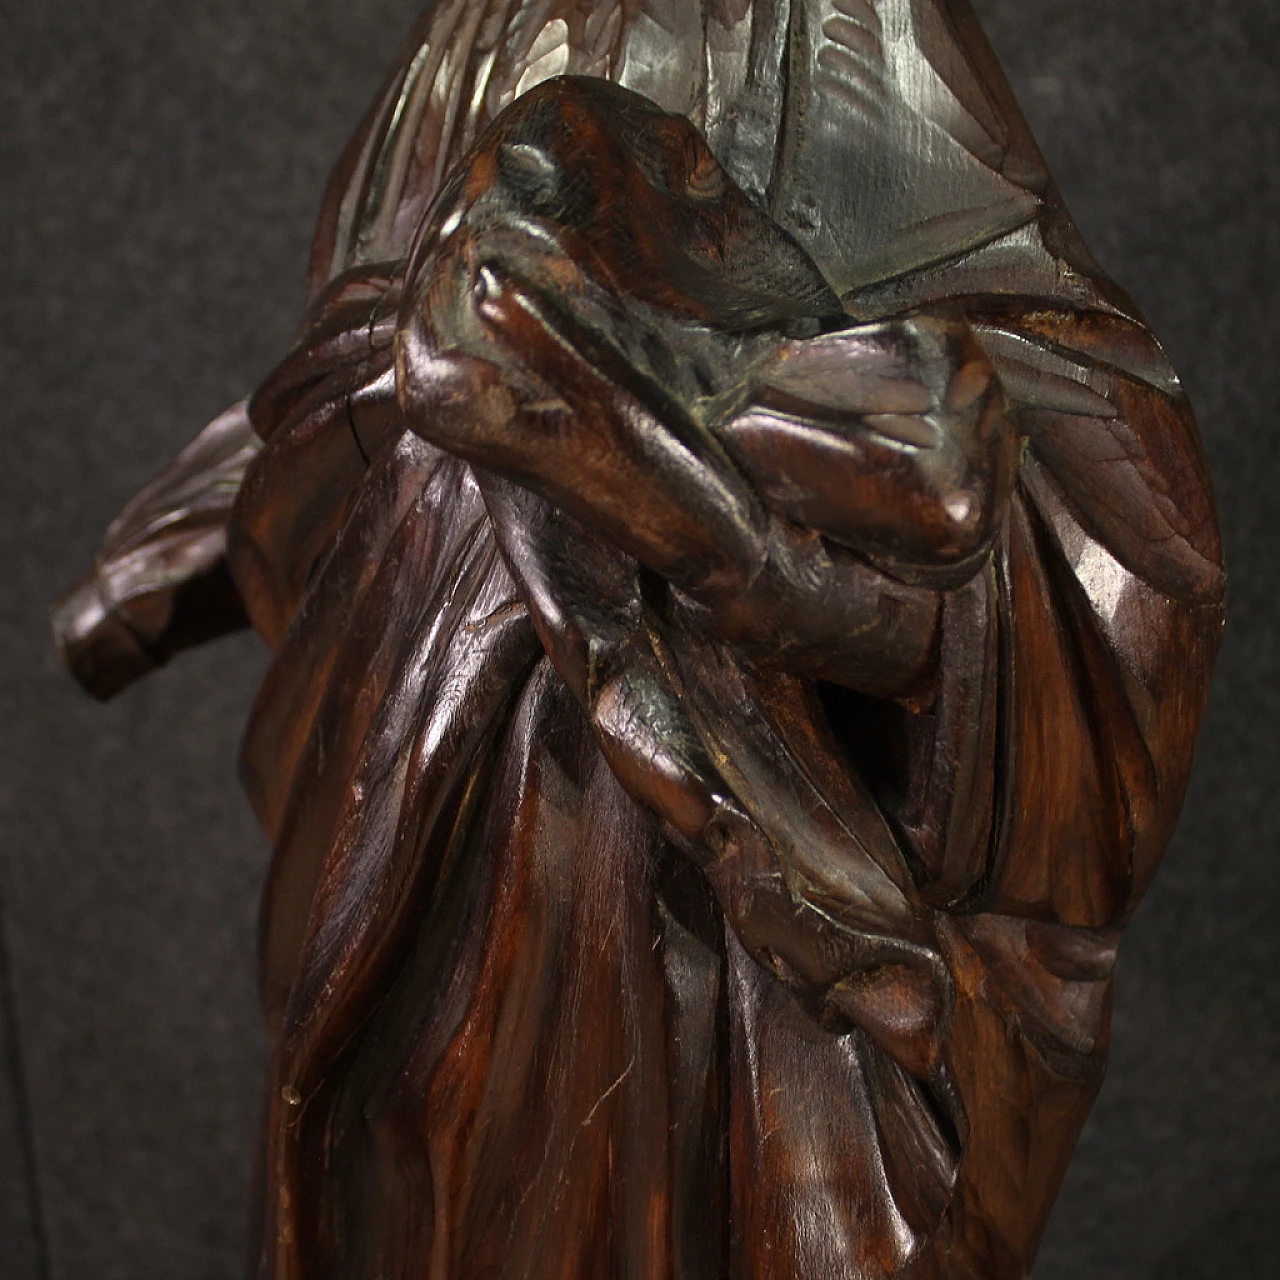 Madonna, mahogany-stained pear wood sculpture, mid-19th century 5